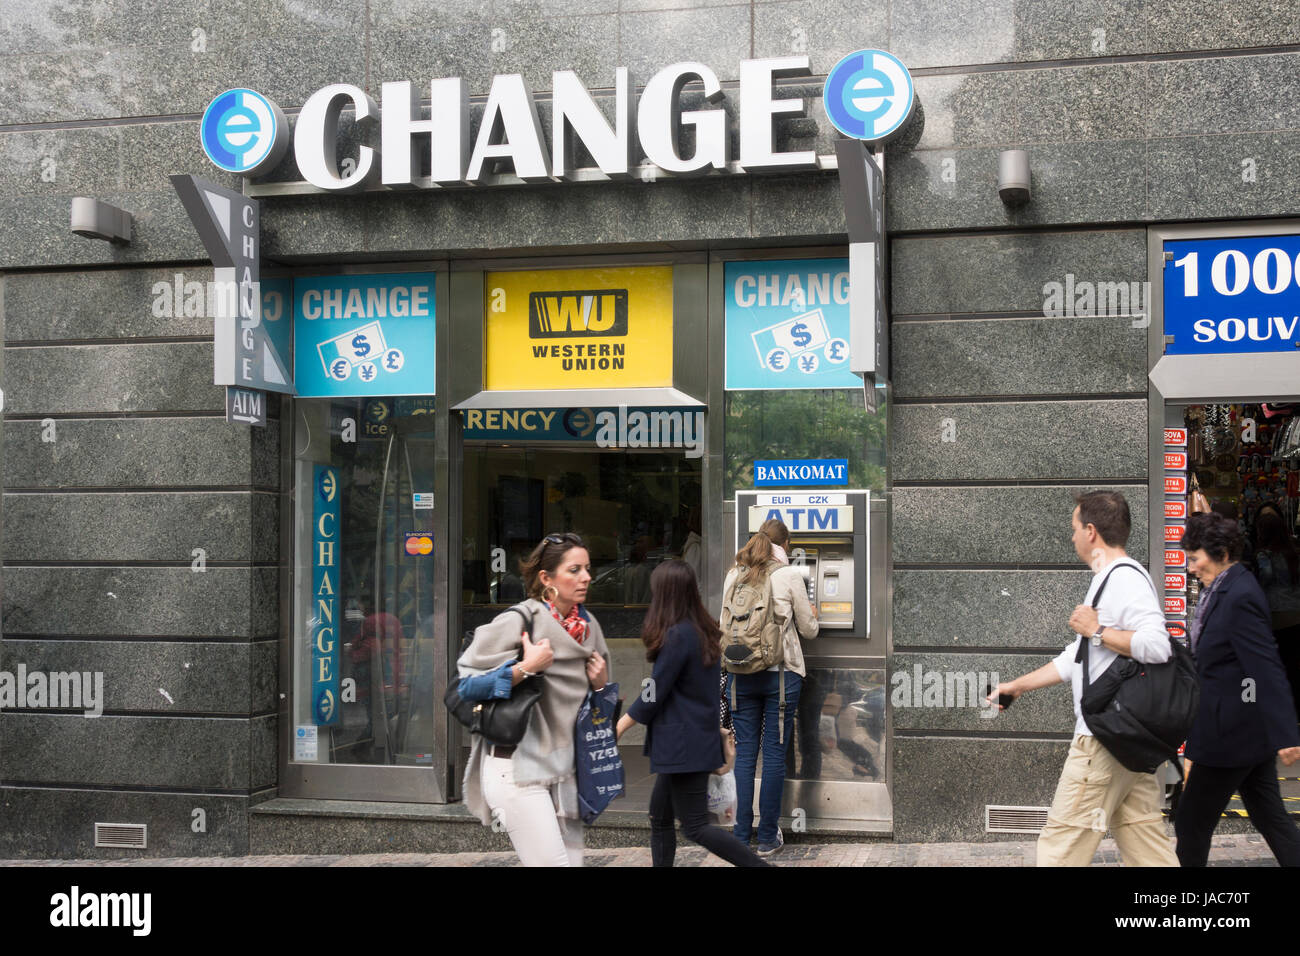 A person withdrawing cash from an ATM at a Western Union bureau de change / currency exchange in Prague, Czech Republic Stock Photo